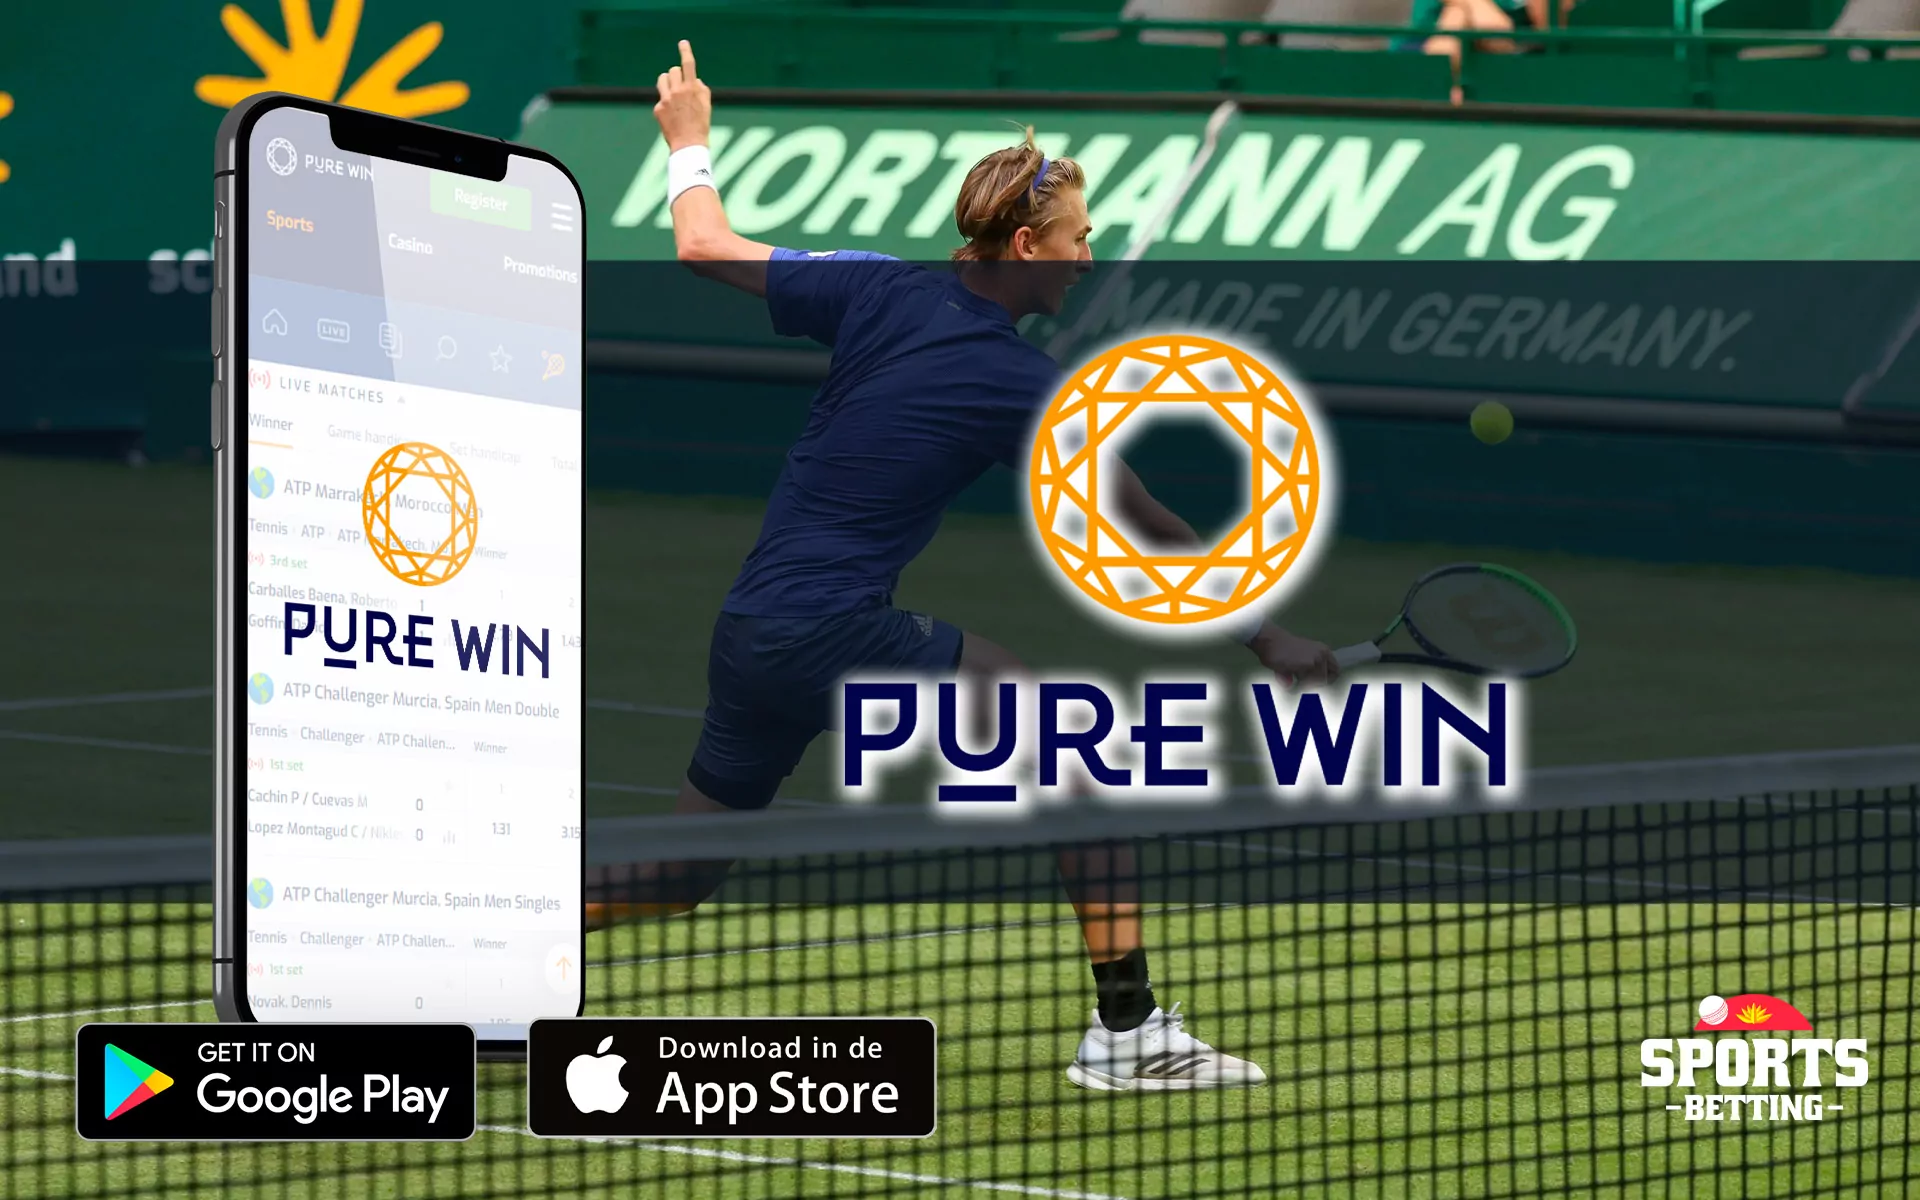 Bet on tennis with Pure Win betting company.